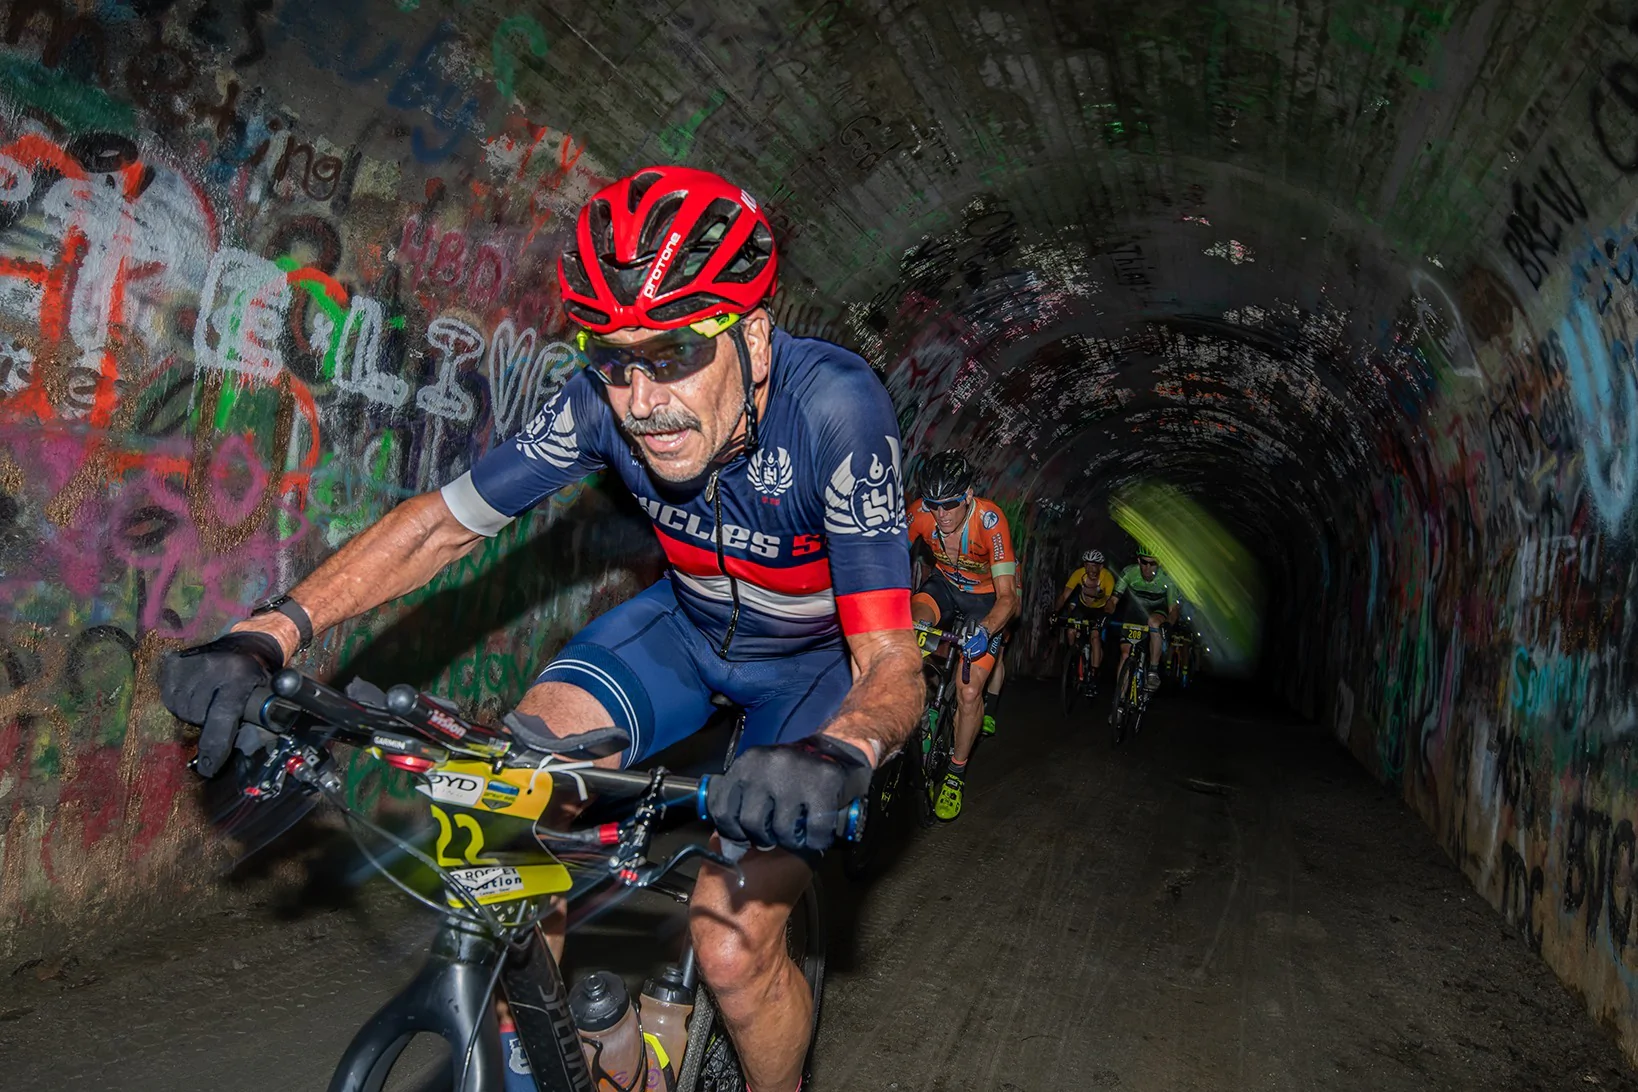 gravel cyclist riding through tunnel at tryon gravel gallop